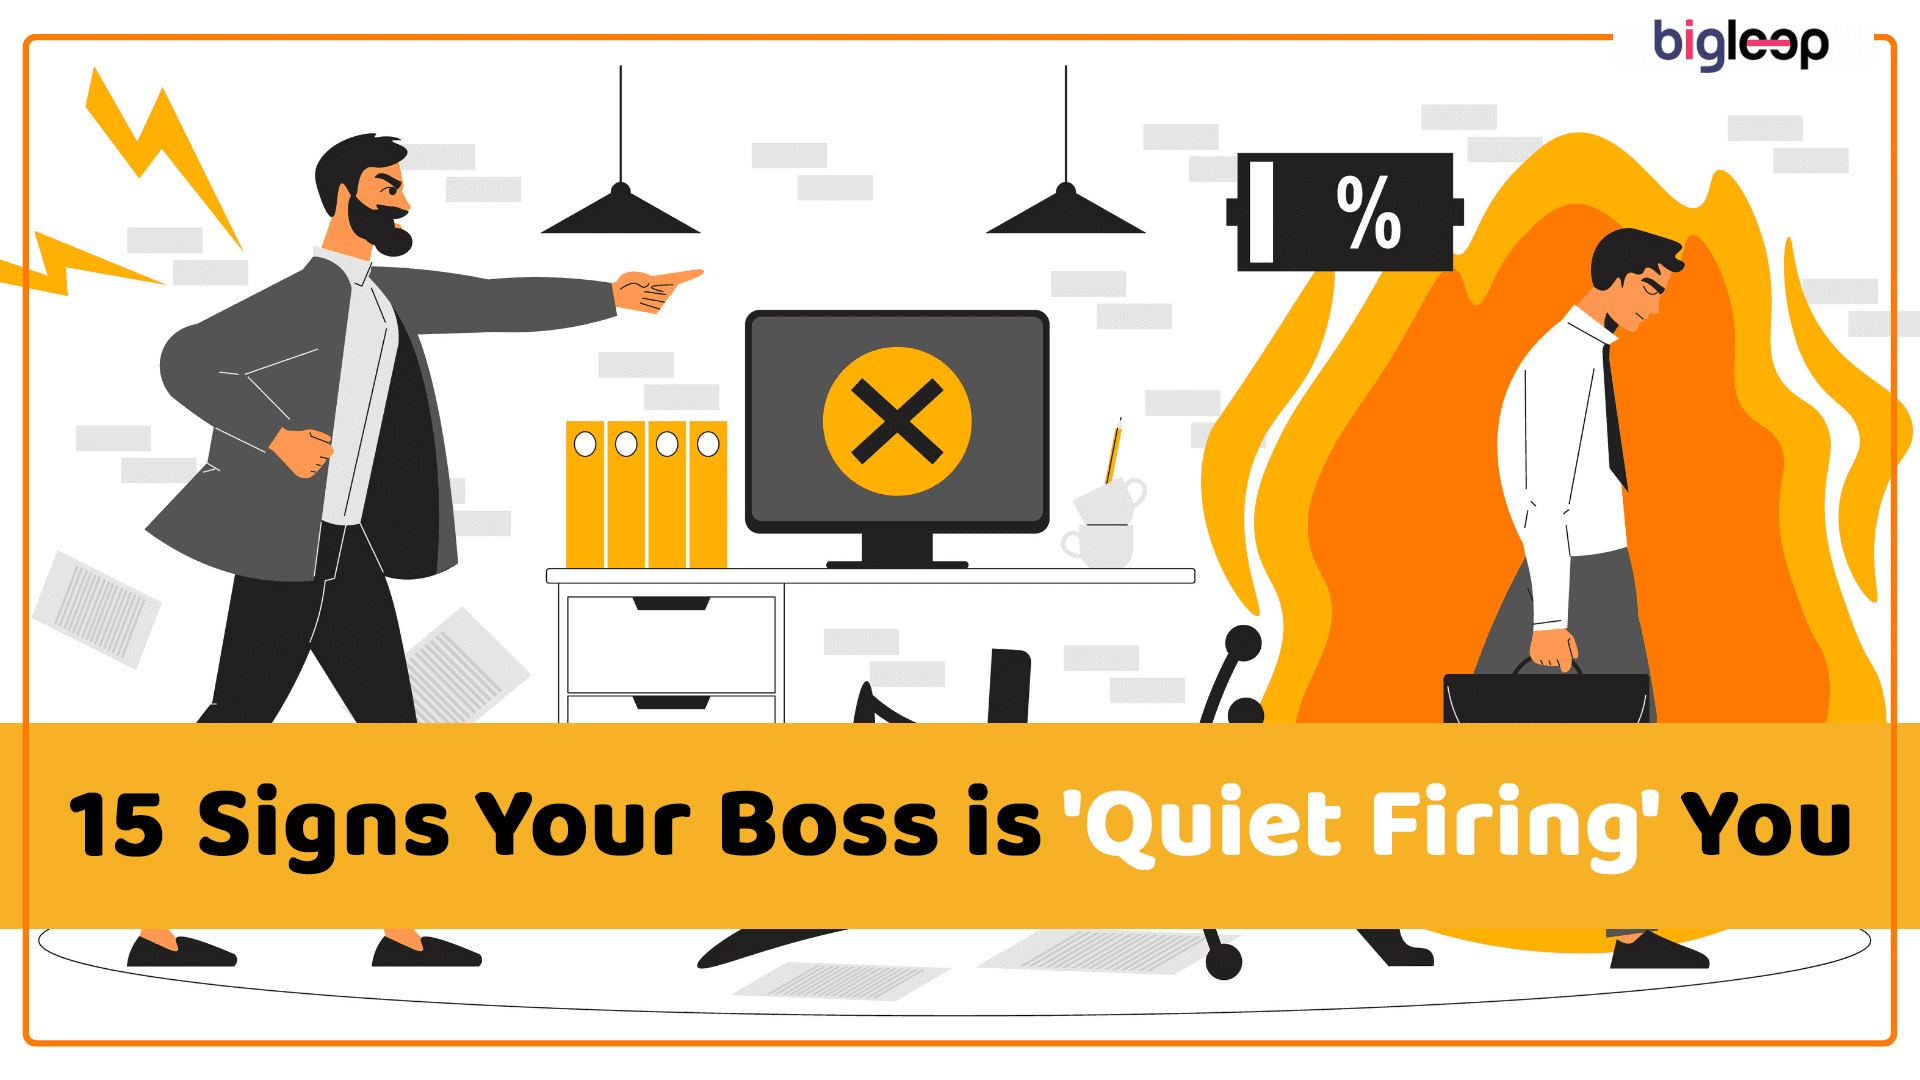 15 Signs Your Boss is 'Quiet Firing' You & the Steps You Should Take Immediately